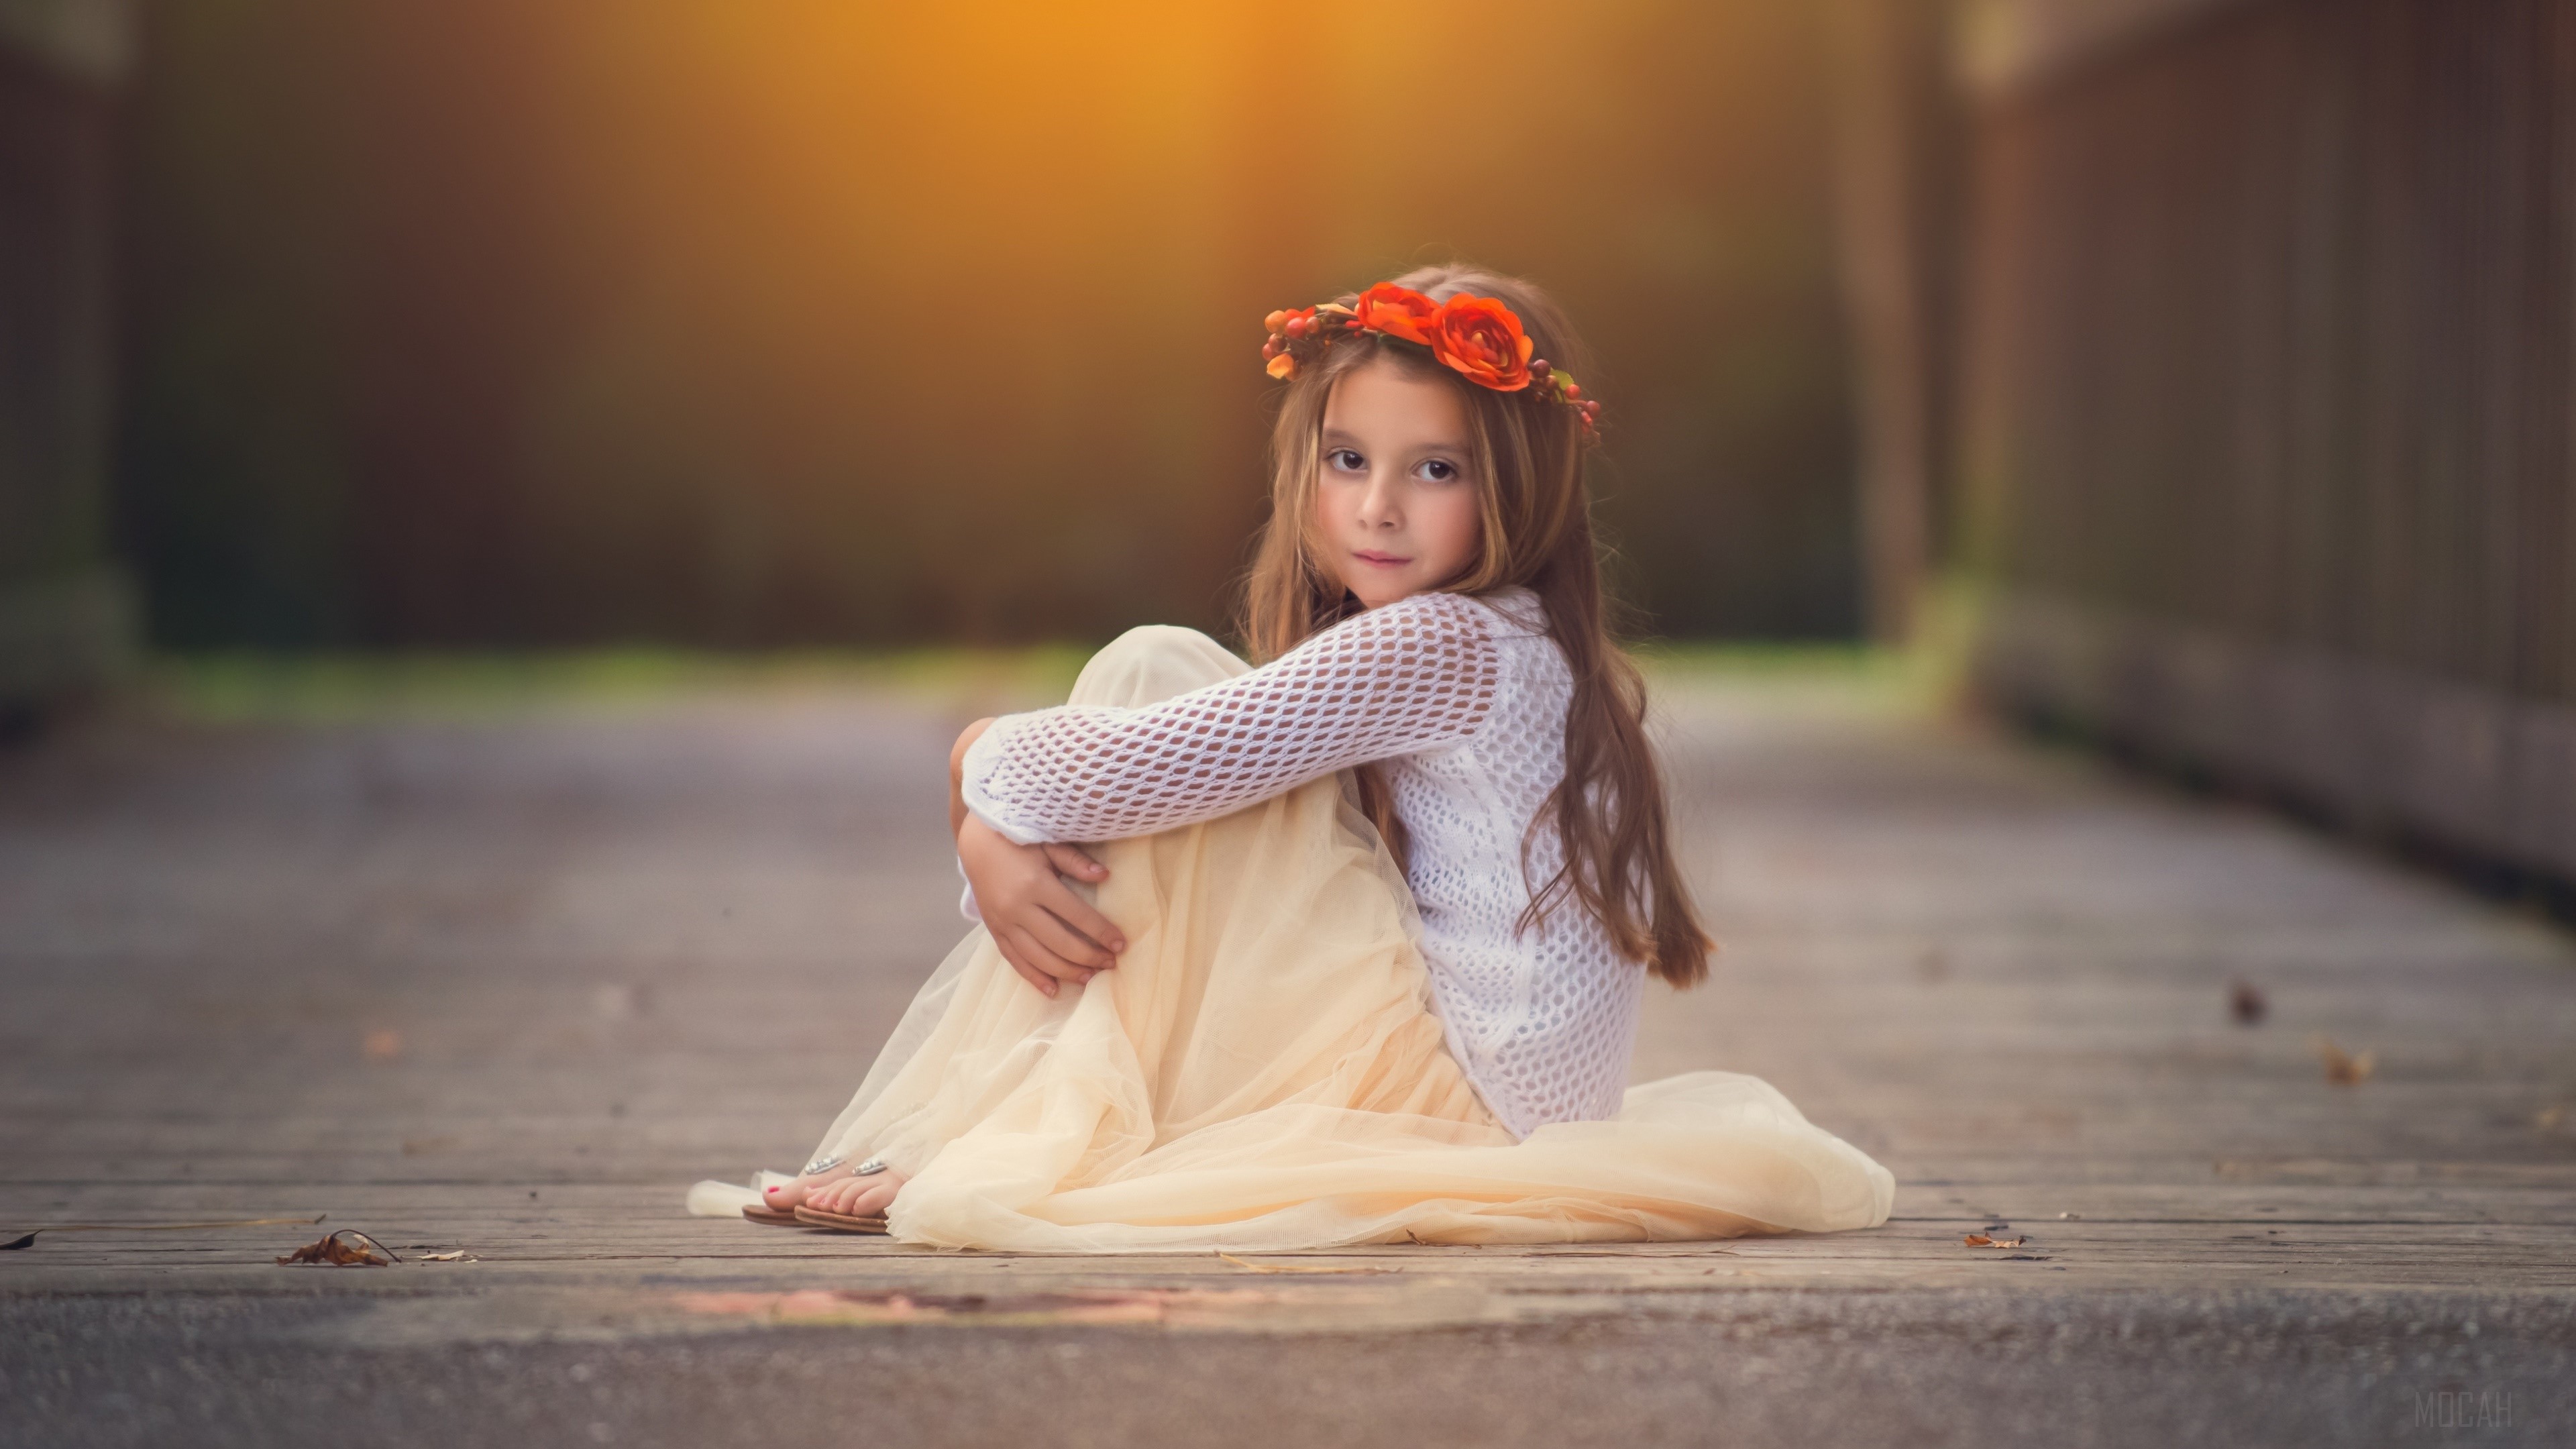 Little girl p k k hd wallpapers backgrounds free download rare gallery